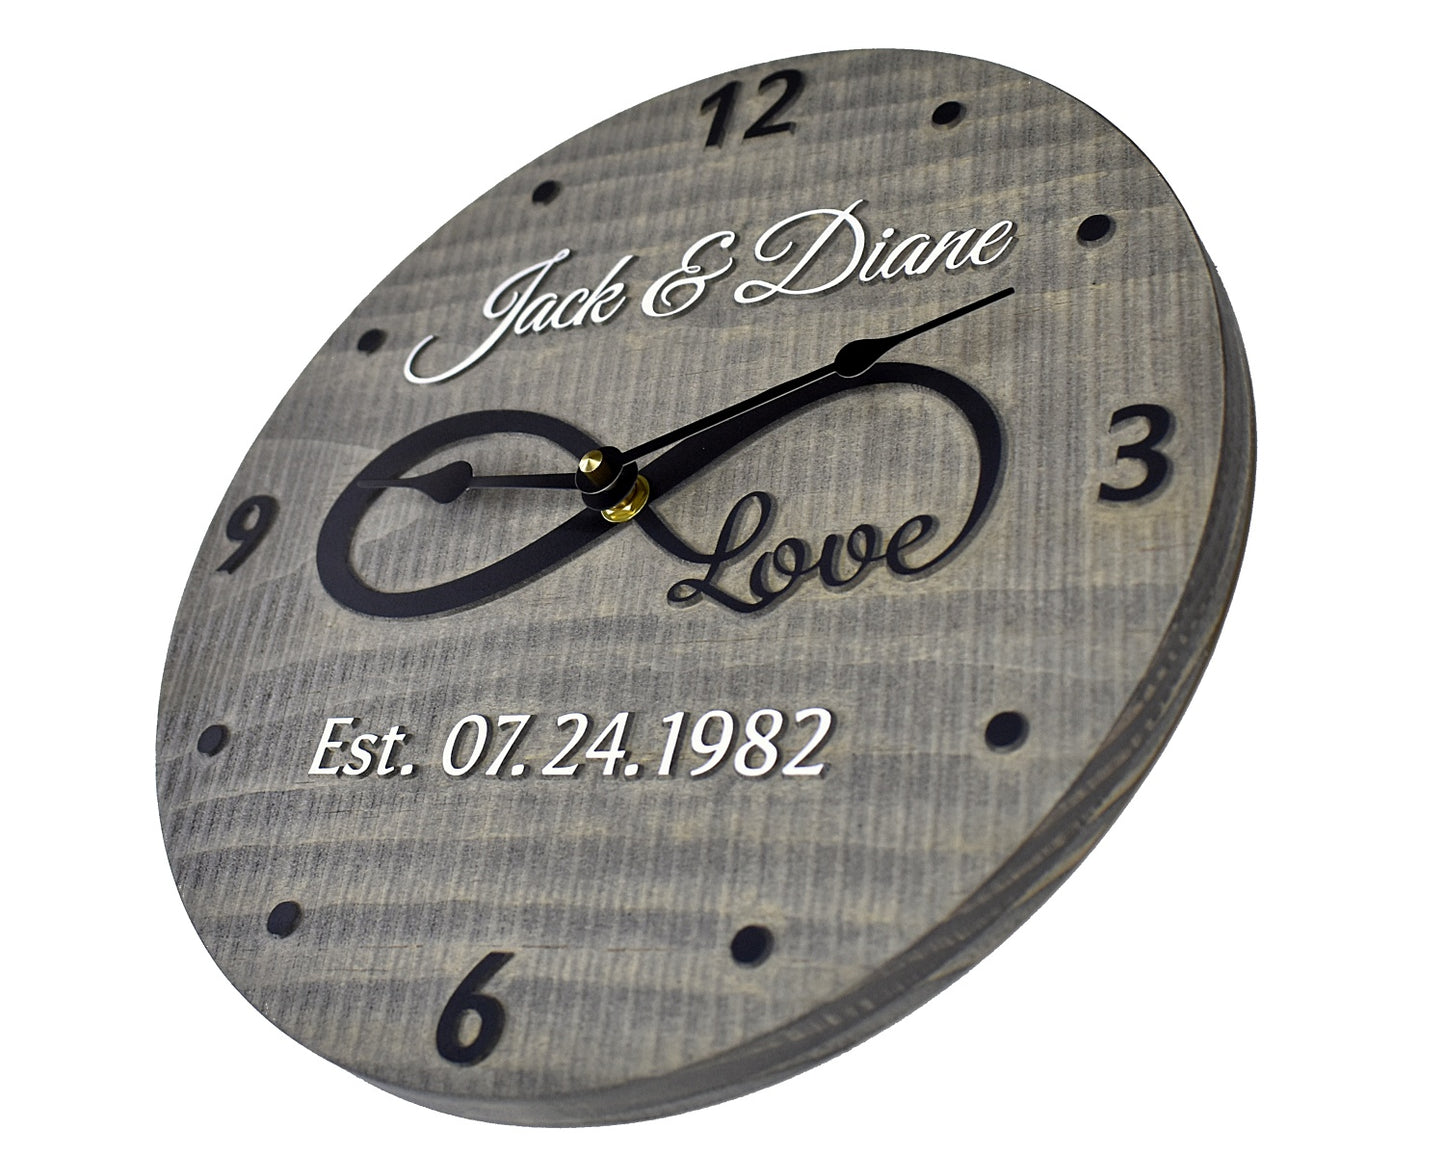 (C) 11 Inch Personalized Clock